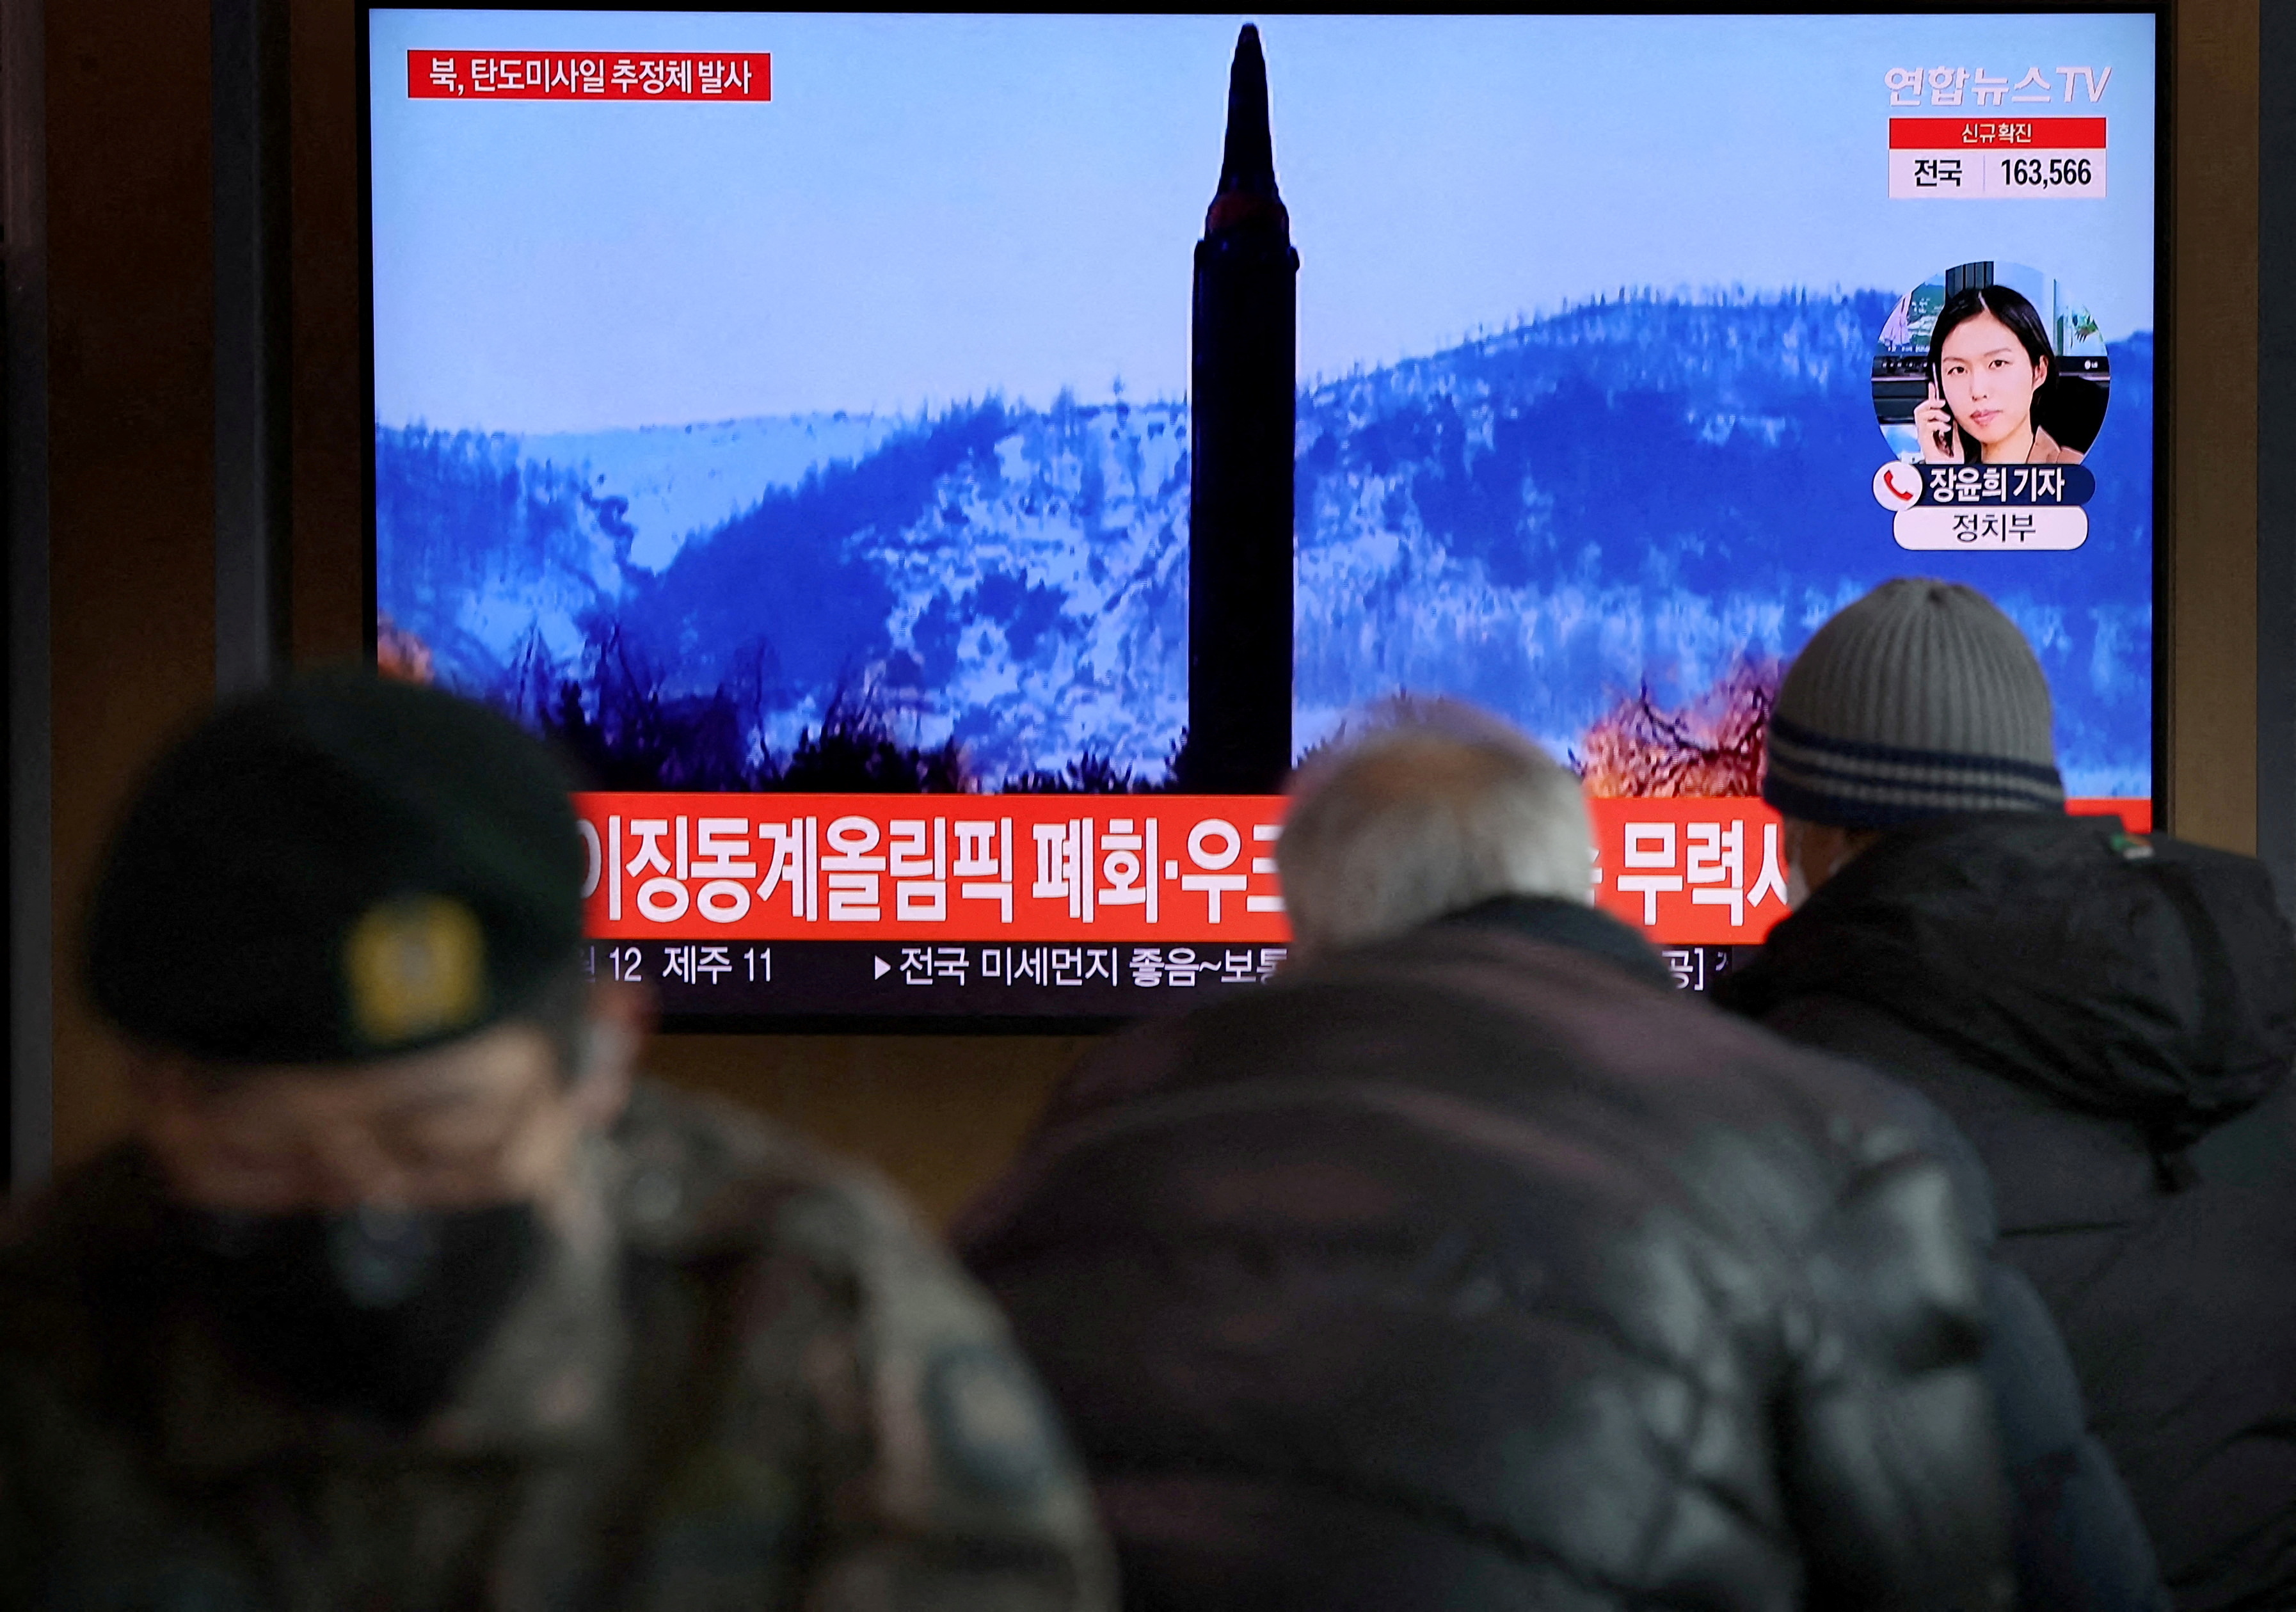 People watch a TV broadcasting file footage of a news report on North Korea firing what appeared to be a ballistic missile, in Seoul